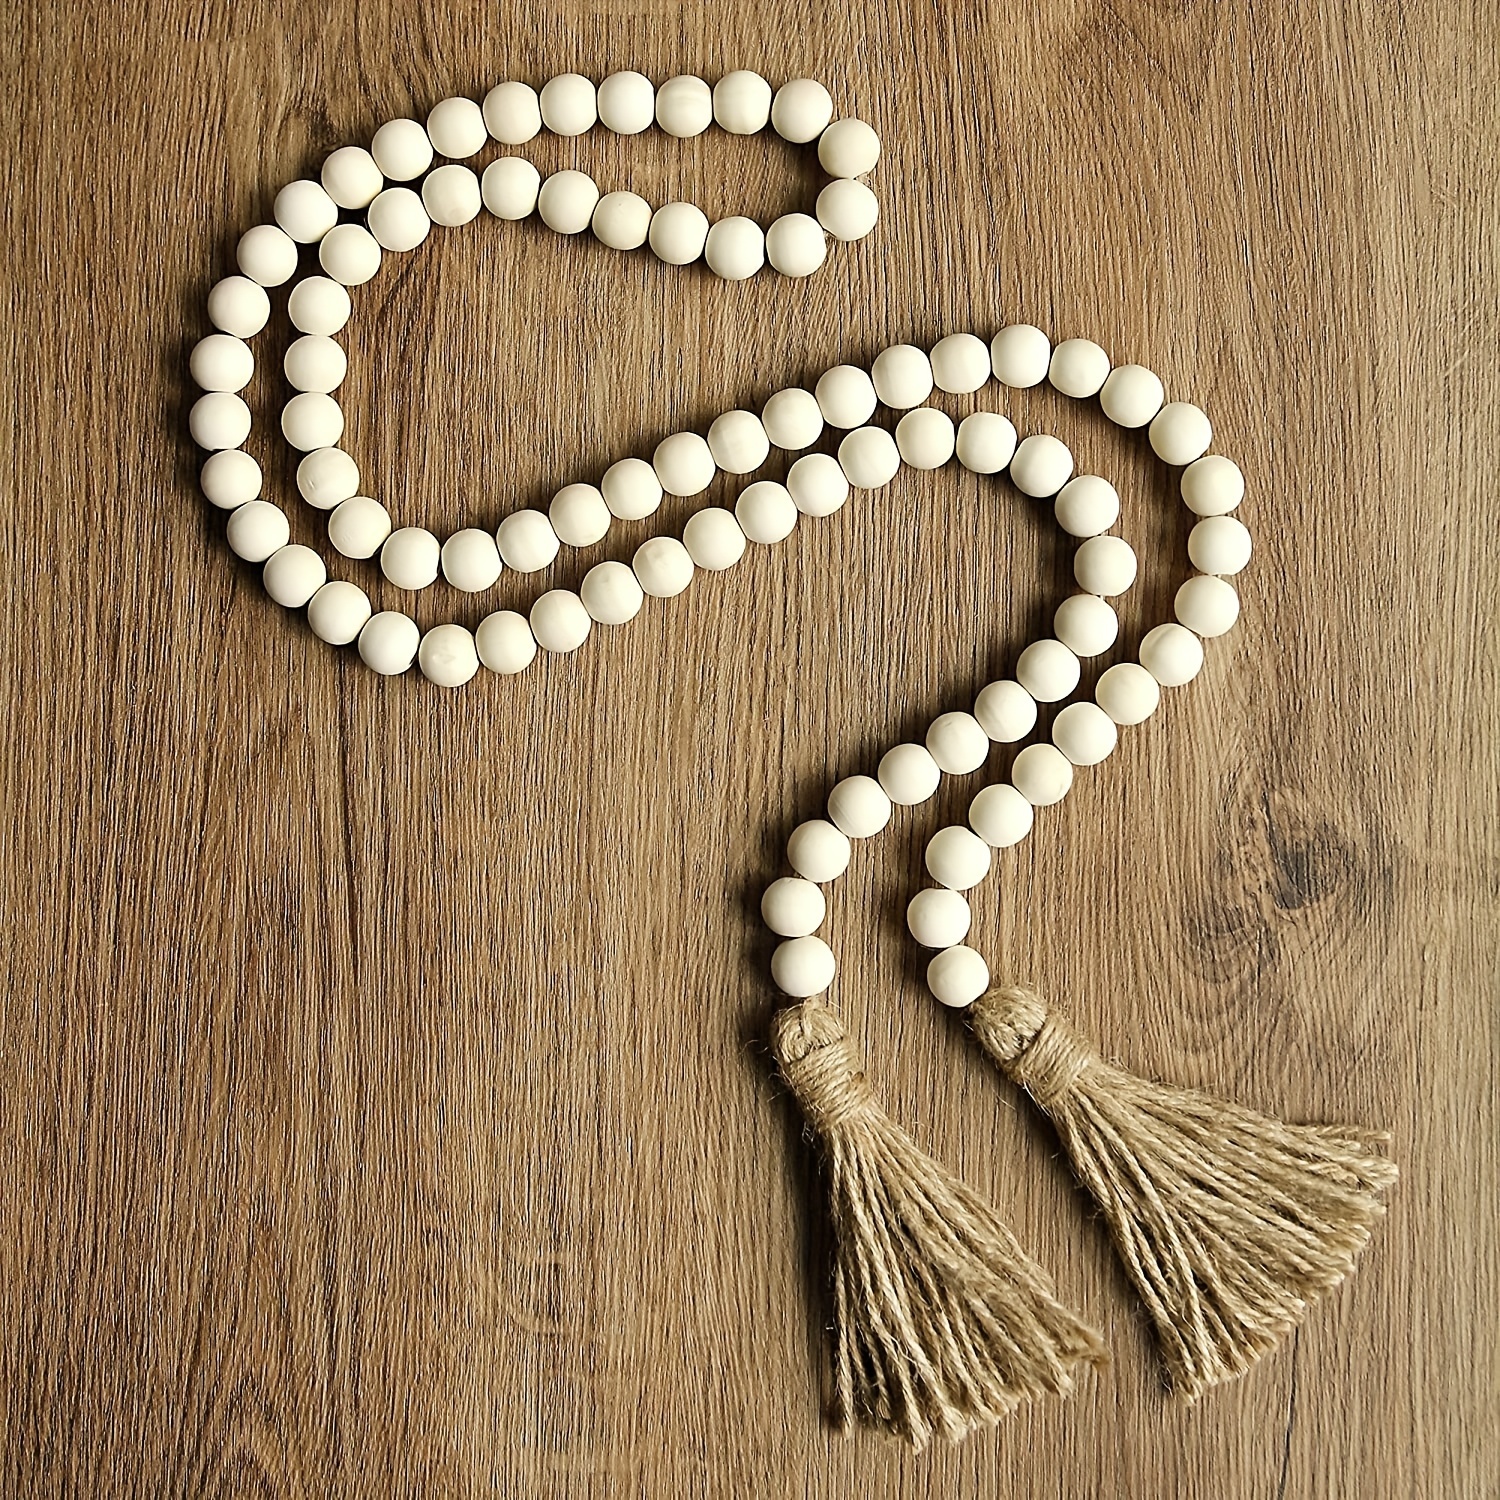  Vosarea Wood Bead Garland Rustic Farmhouse Beads with Tassel  Home Wall Hanging Prayer Beads Decor Beads Wooden : Home & Kitchen